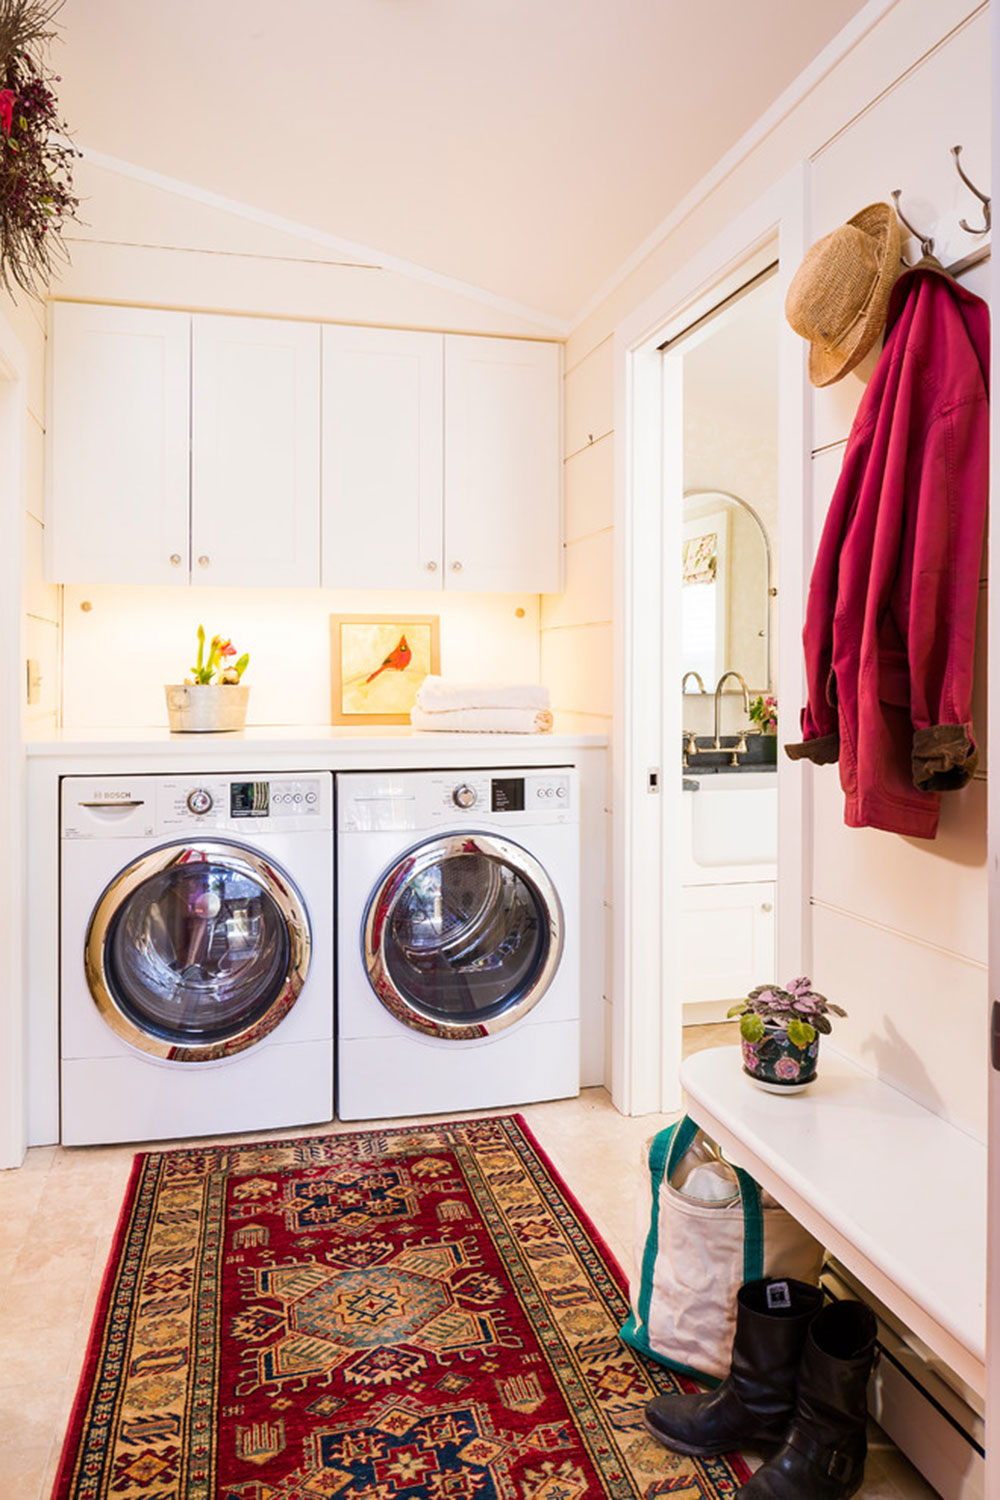 New-Life-for-a-200-Year-Old-Home-by-Gilberte-Interiors-inc How to organize a laundry room? Some storage ideas